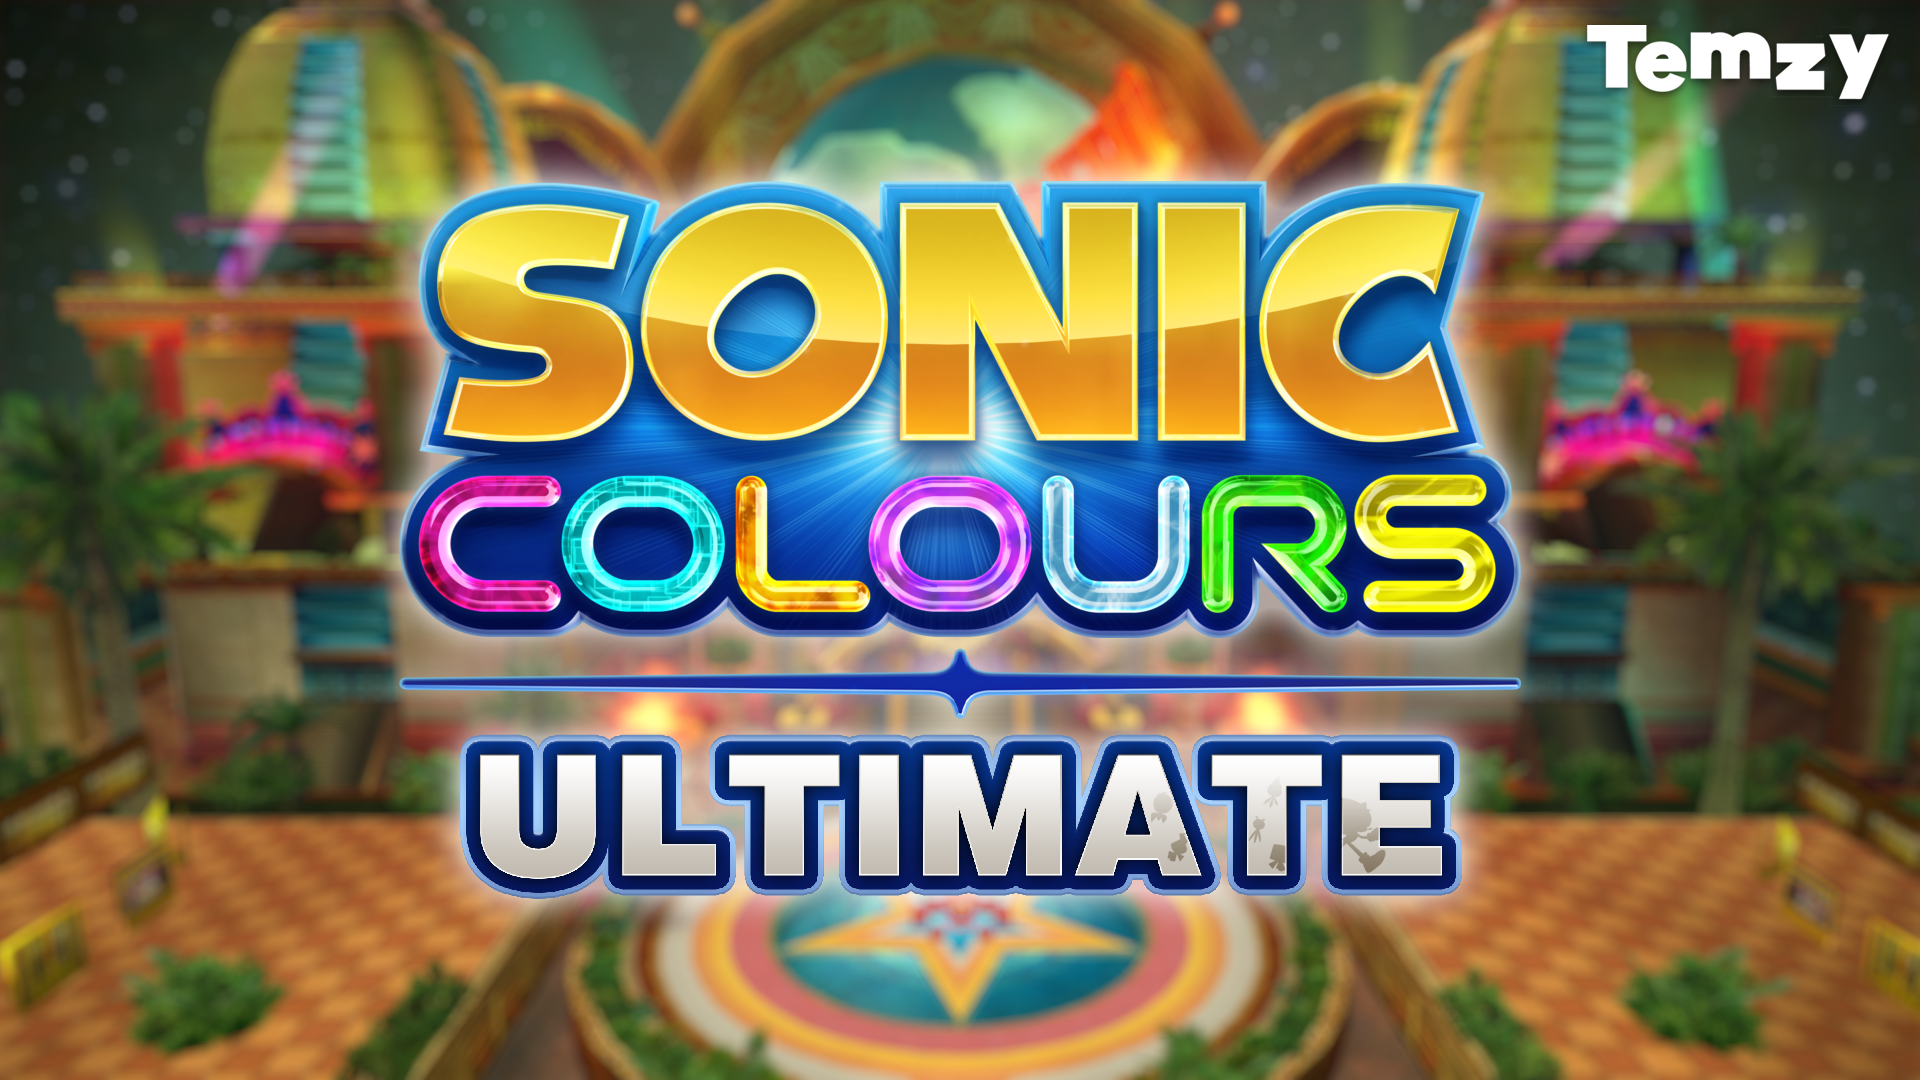 Because Sonic Colours is trending (and because I have too much time on my hands lmao), here is my concept of the Sonic Colours Ultimate logo: SonicTheHedgehog